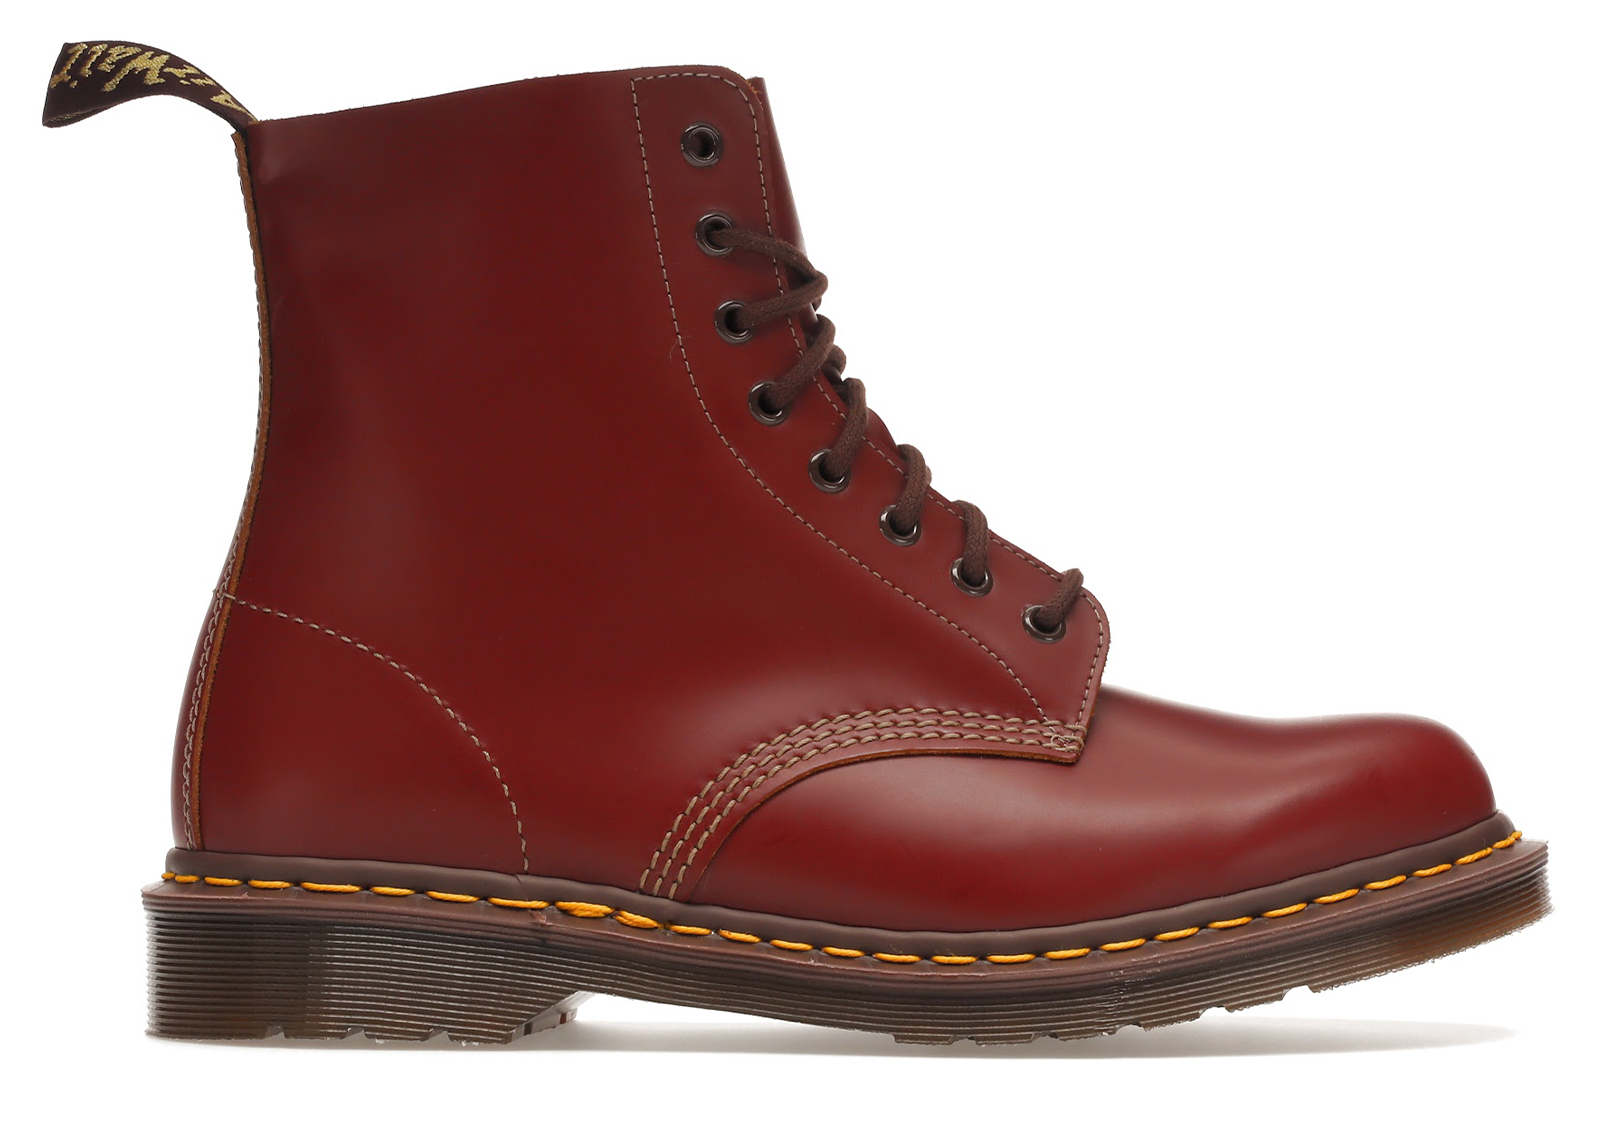 Dr.Martens MADE IN ENGLAND 1460雨の日の着用はしておりません